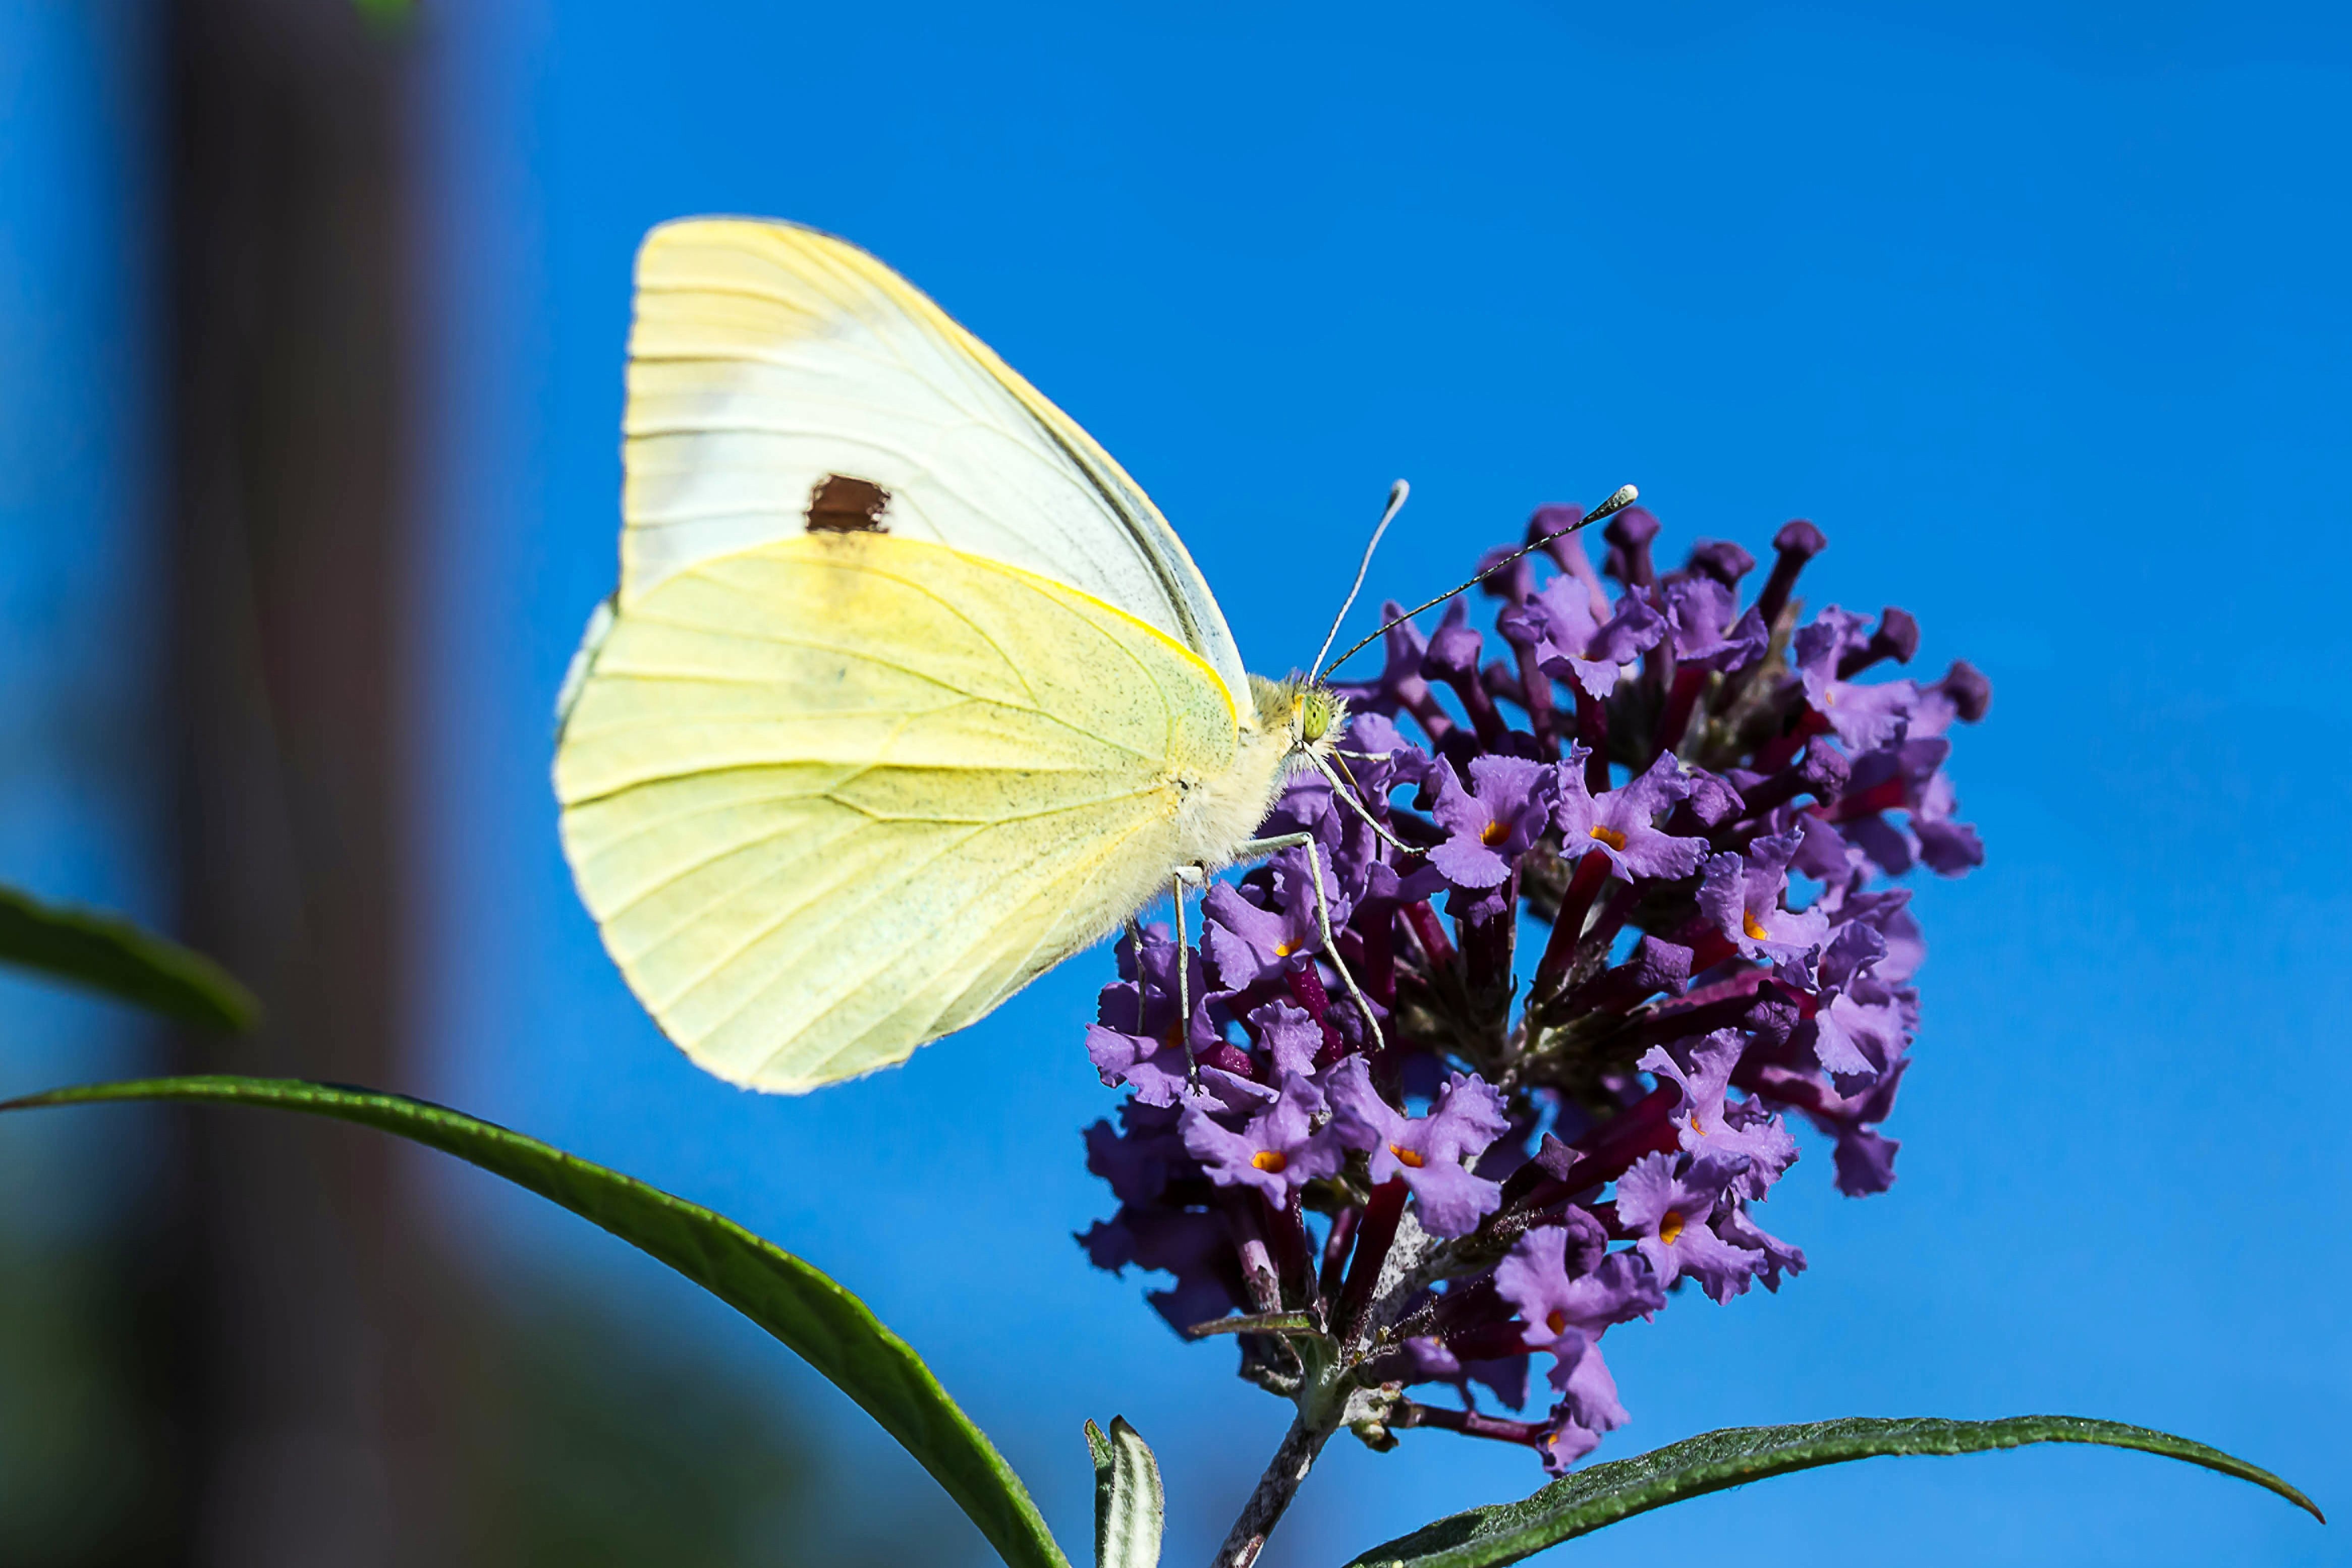 Cabbage White Ling in the Garden, Animal, Blooming, Butterfly, Cabbage, HQ Photo